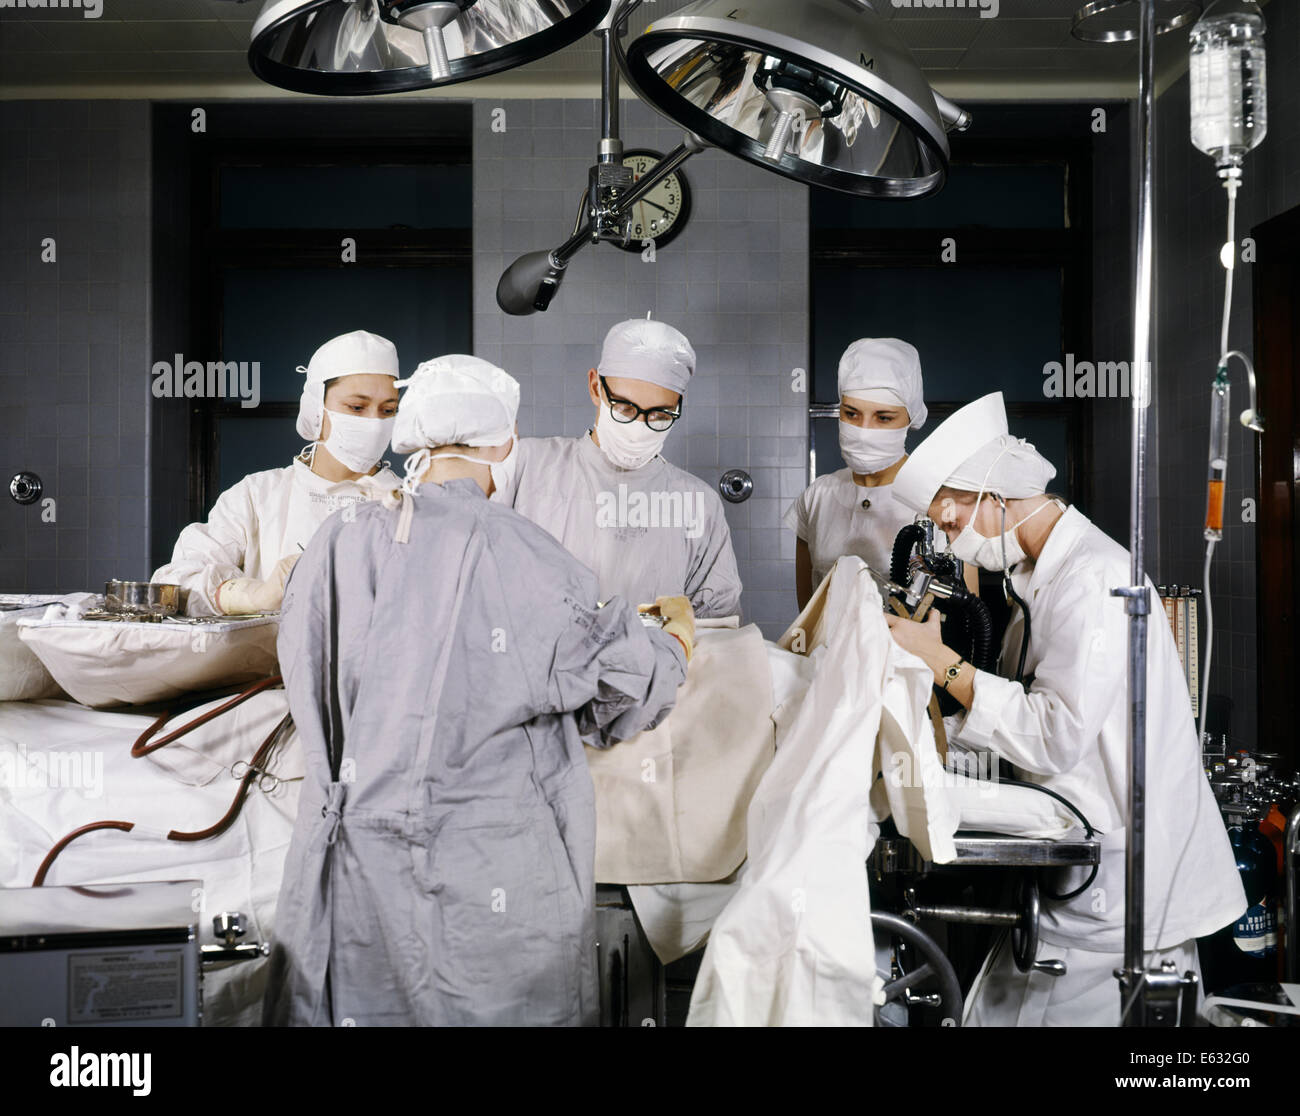 1950s HOSPITAL OPERATING ROOM SURGERY IN PROGRESS MEN WOMEN DOCTORS NURSES WEARING STERILE SURGICAL MASKS CAPS GOWNS Stock Photo